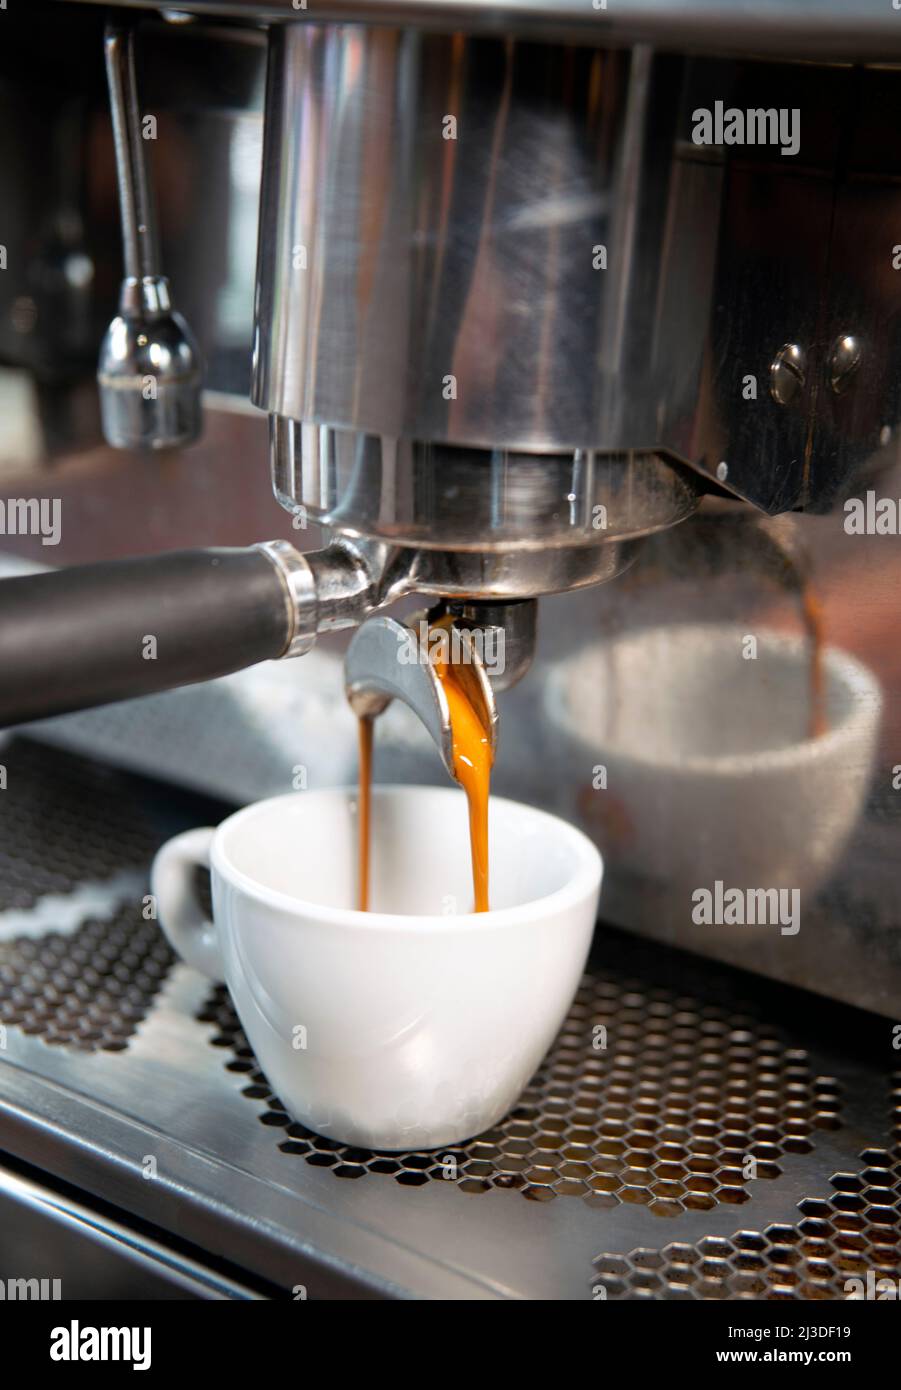 Creamy coffee pouring from a coffee machine up close Stock Photo